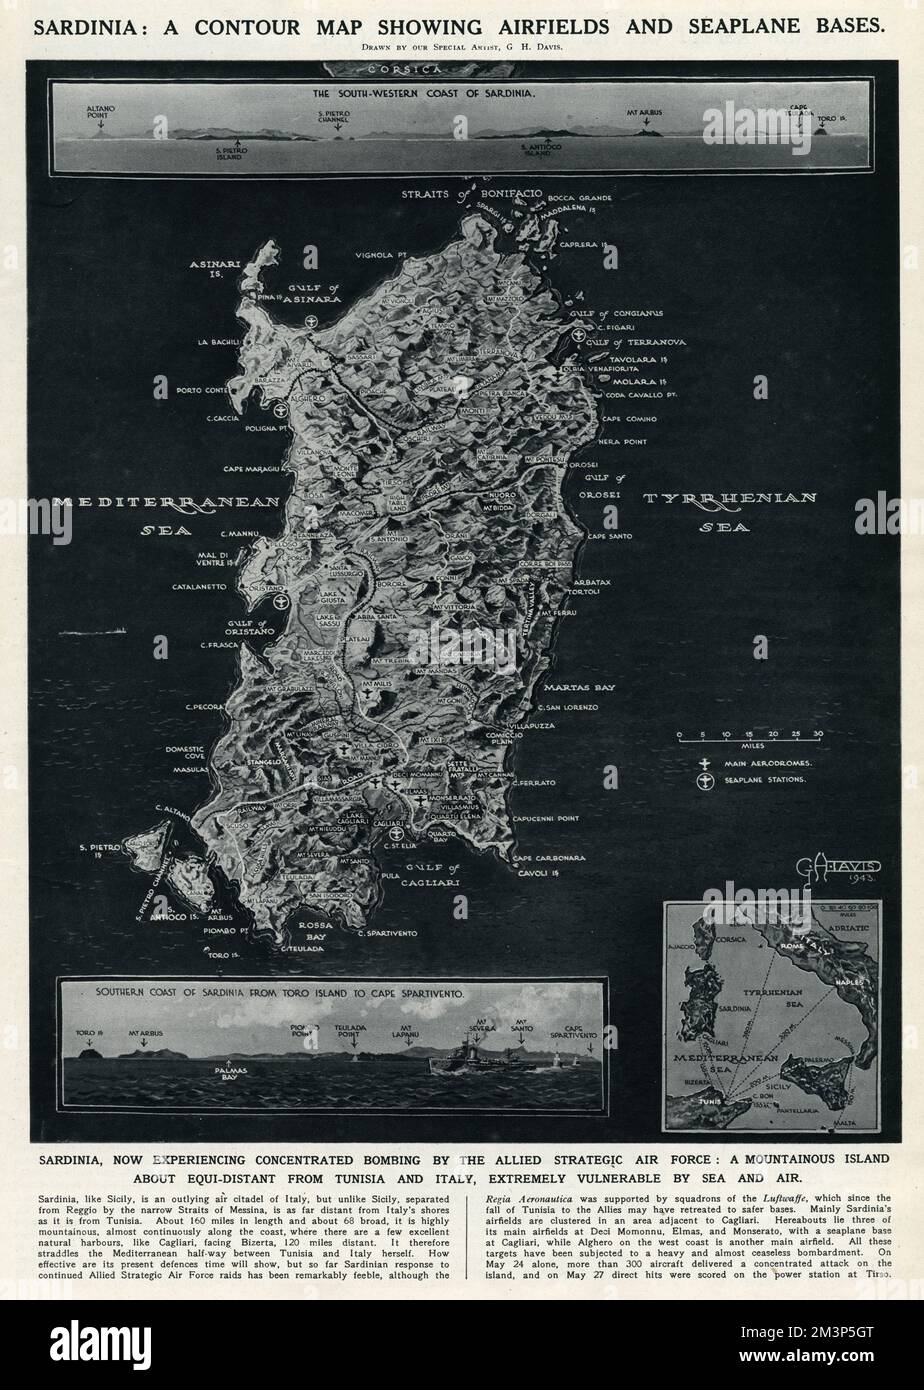 A contour map of Sardinia, showing airfields and seaplane bases during the Second World War.  The island was experiencing concentrated bombing by the Allied Strategic Air Force.       Date: 1943 Stock Photo